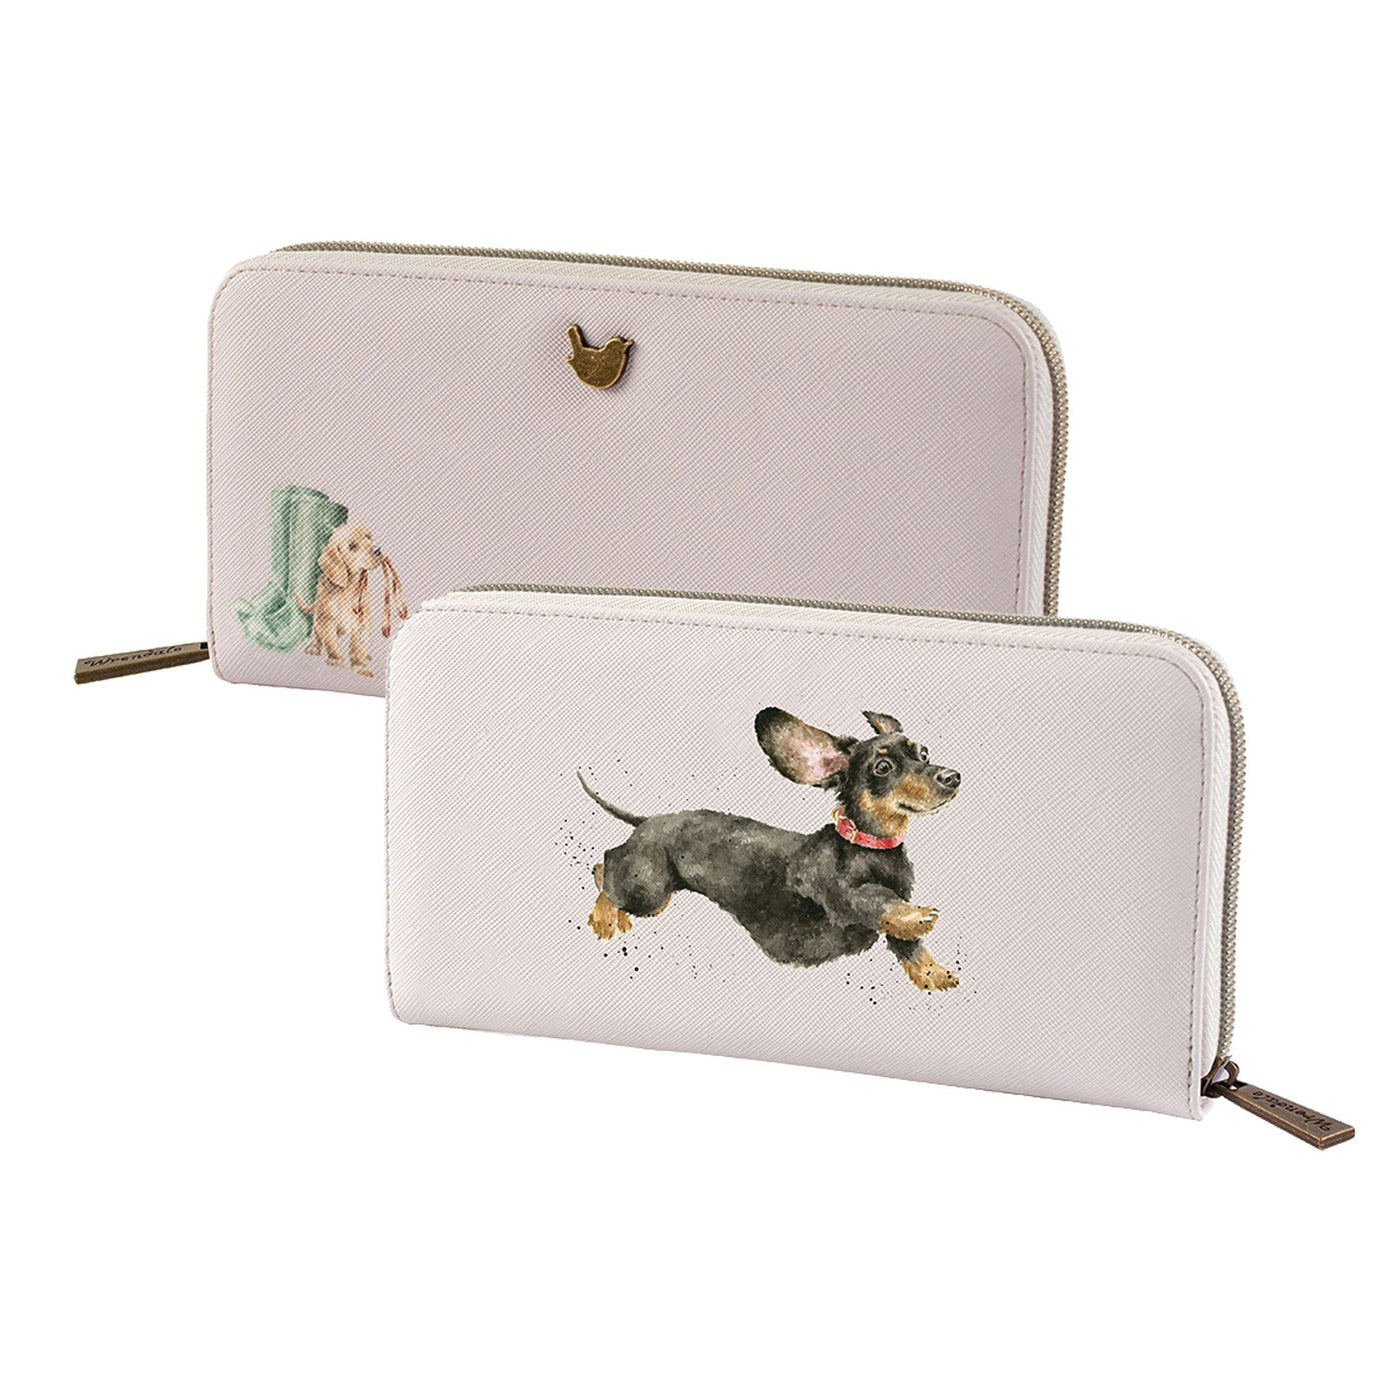 Wrendale Designs Purses & Travel Wallets Dog Large Purse - Choice of Design